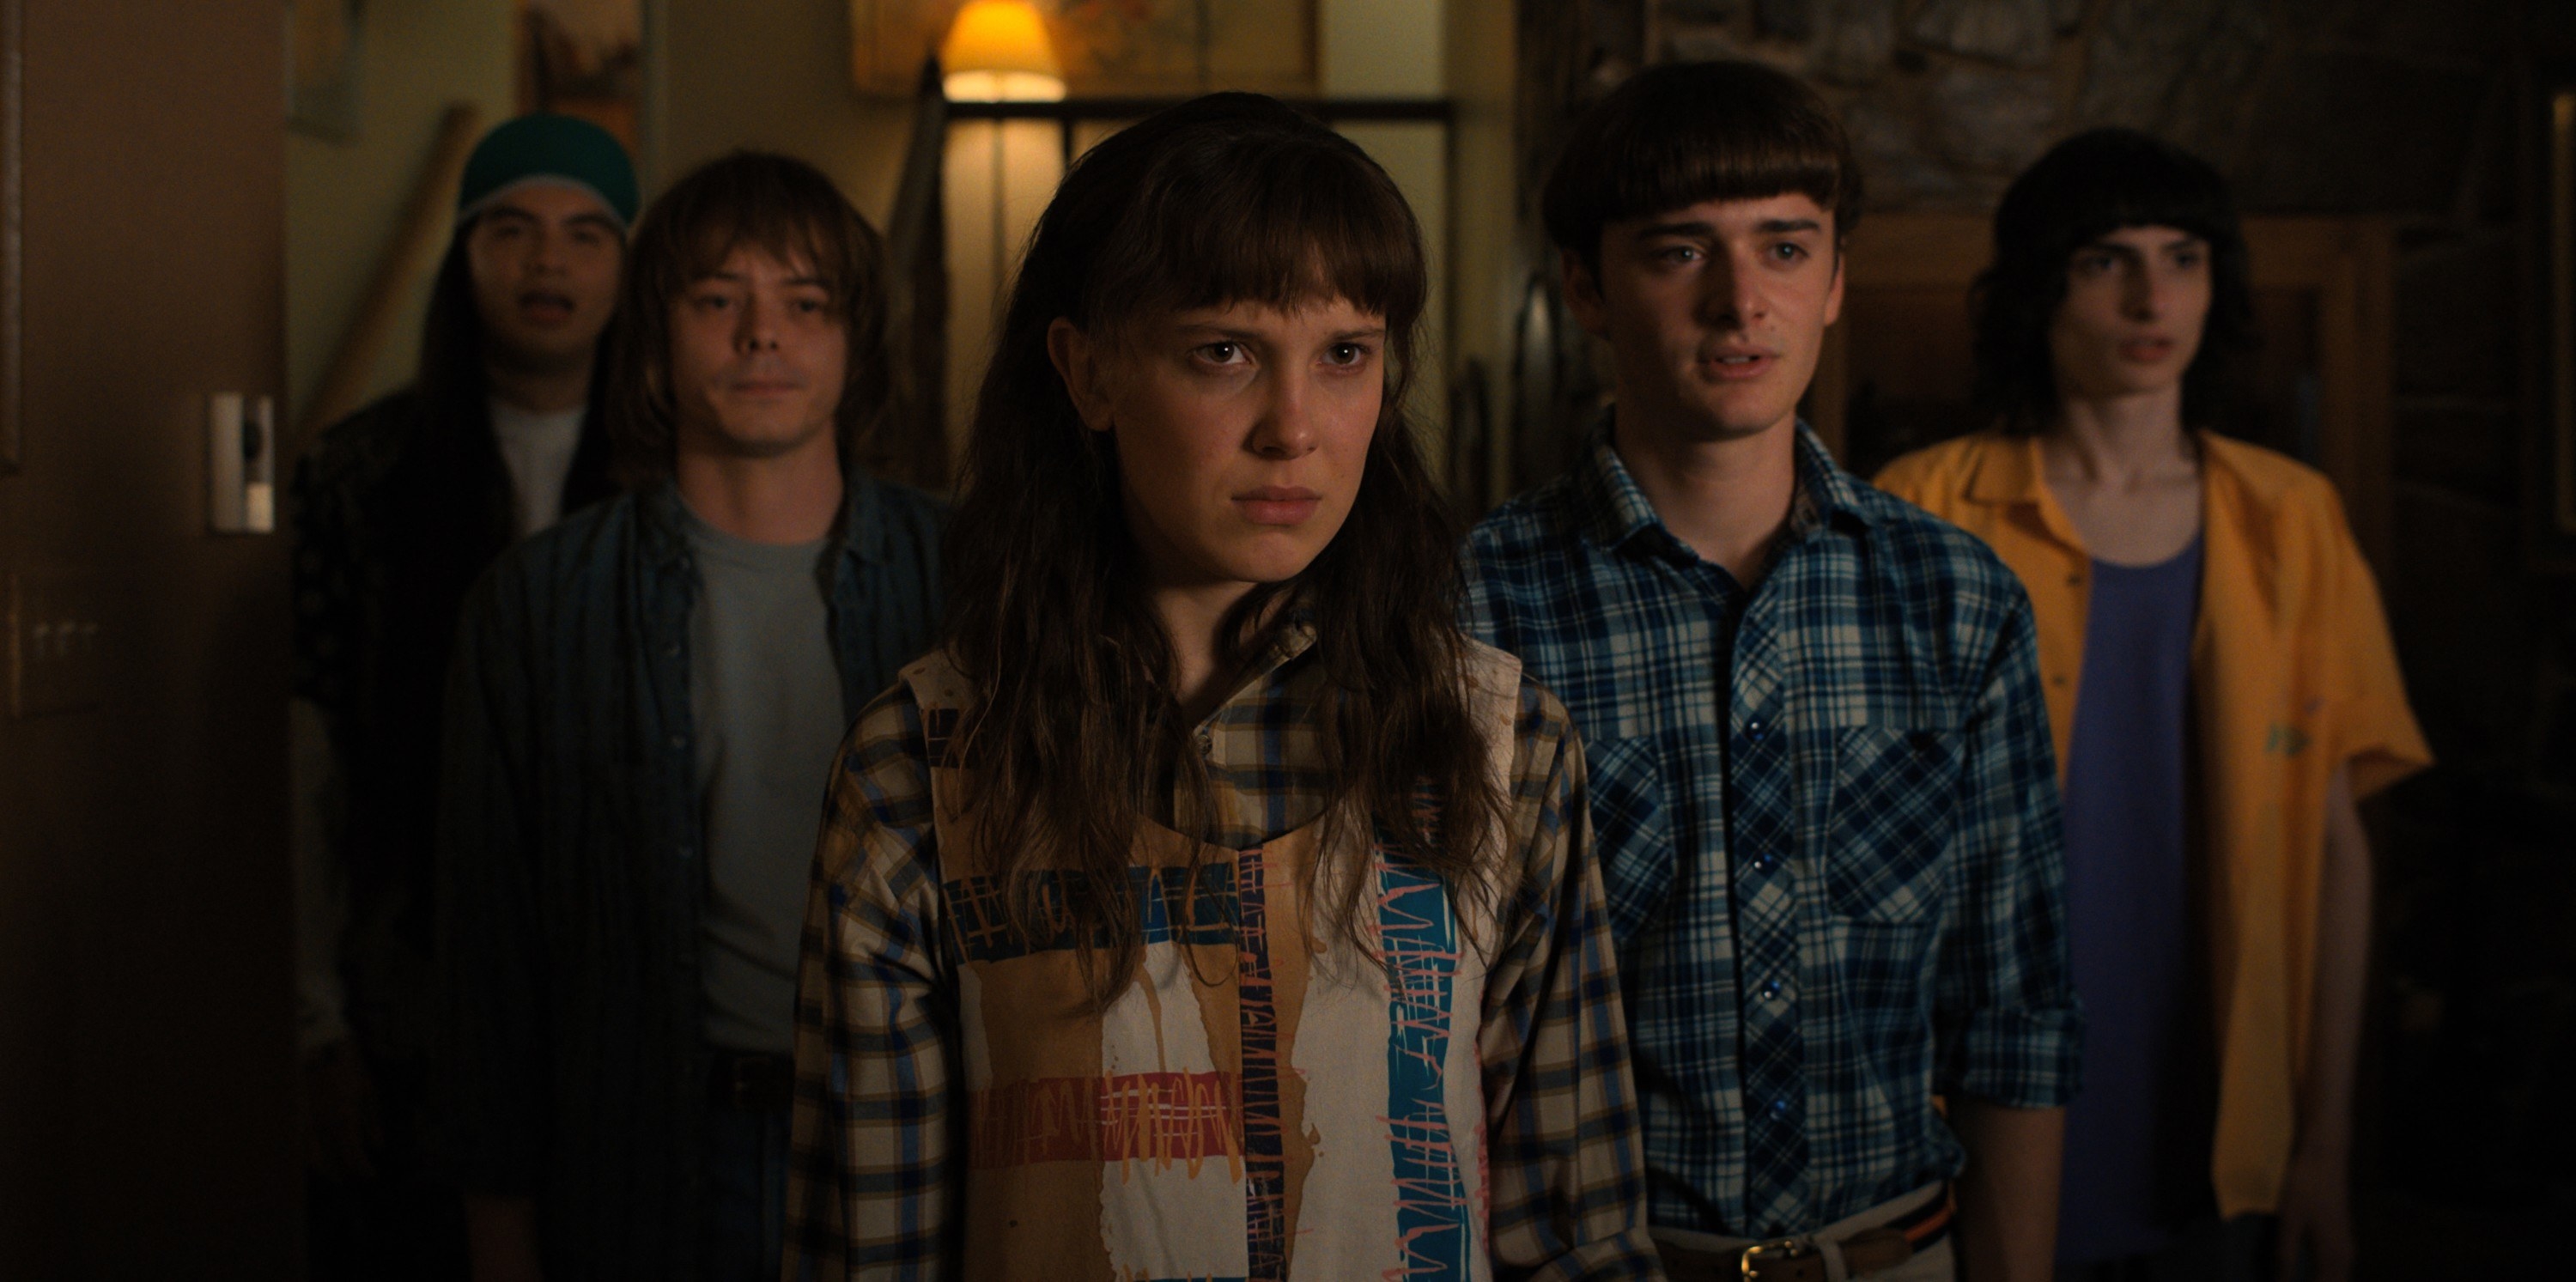 Argyle, Jonathon Byers, Will Byers, and Mike Wheeler stand in a group behind Eleven